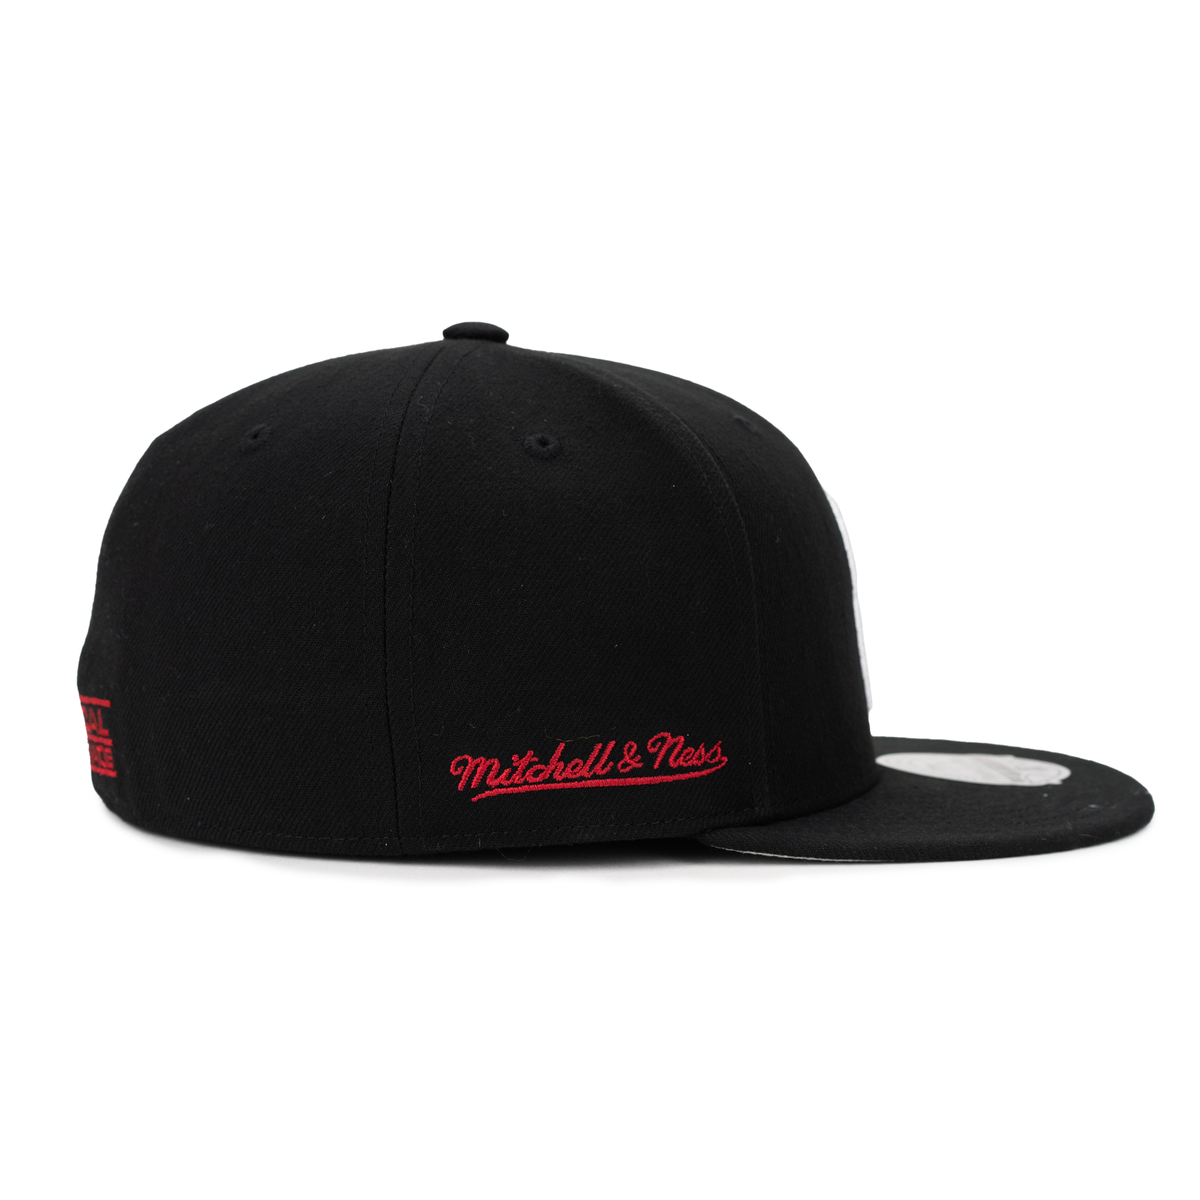 white sox mitchell and ness snapback